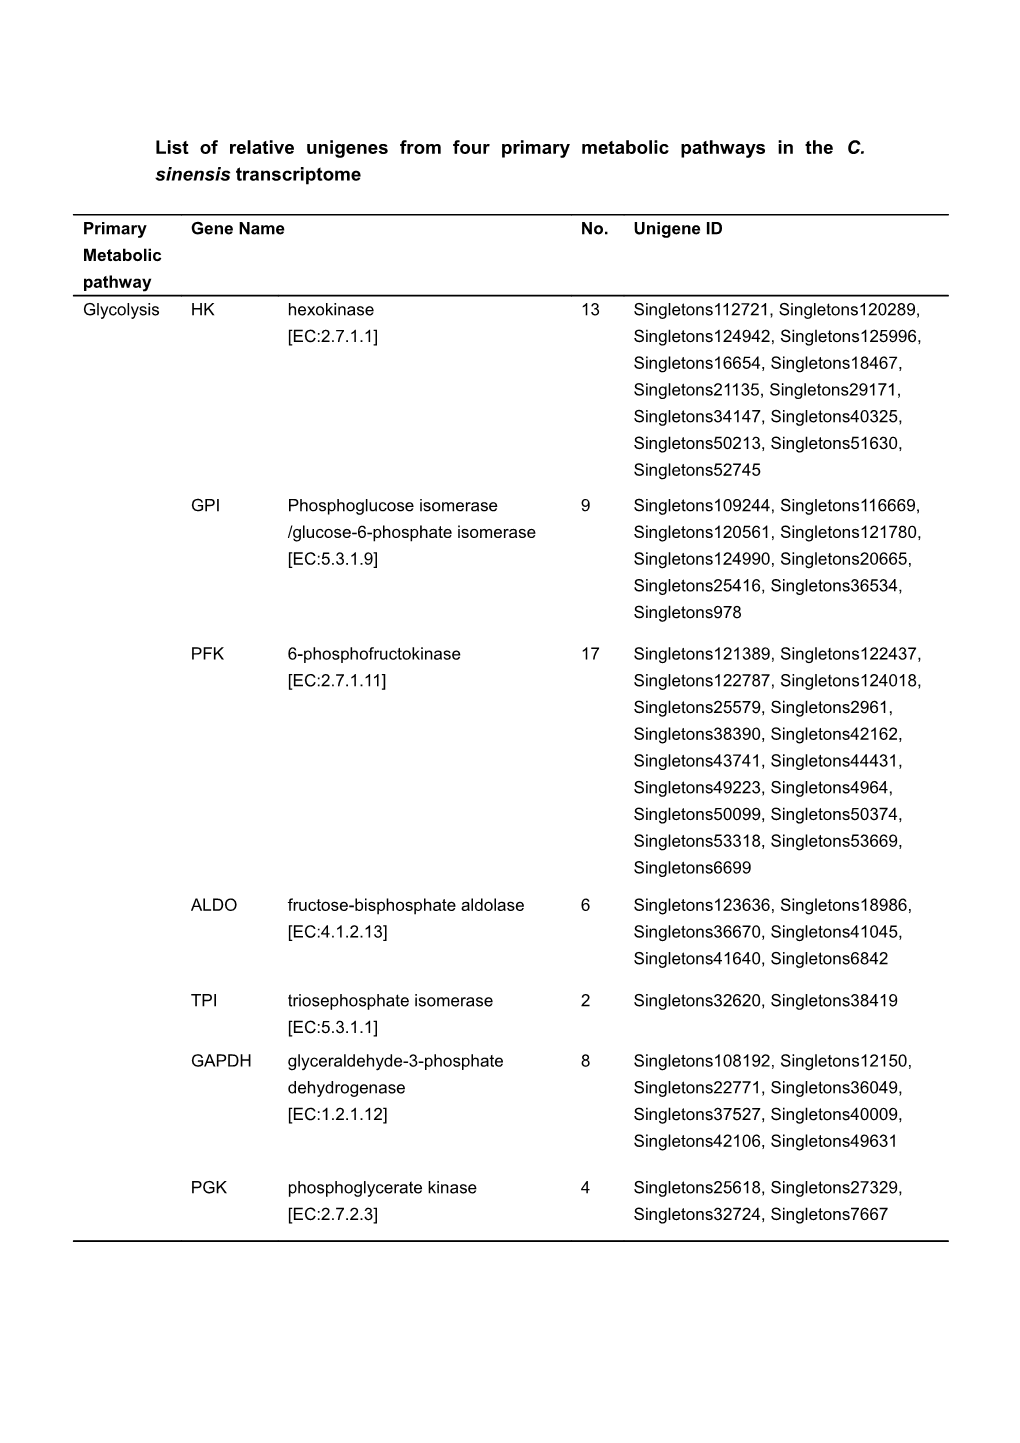 List of Relative Unigenes from Four Primary Metabolic Pathways in the C. Sinensis Transcriptome